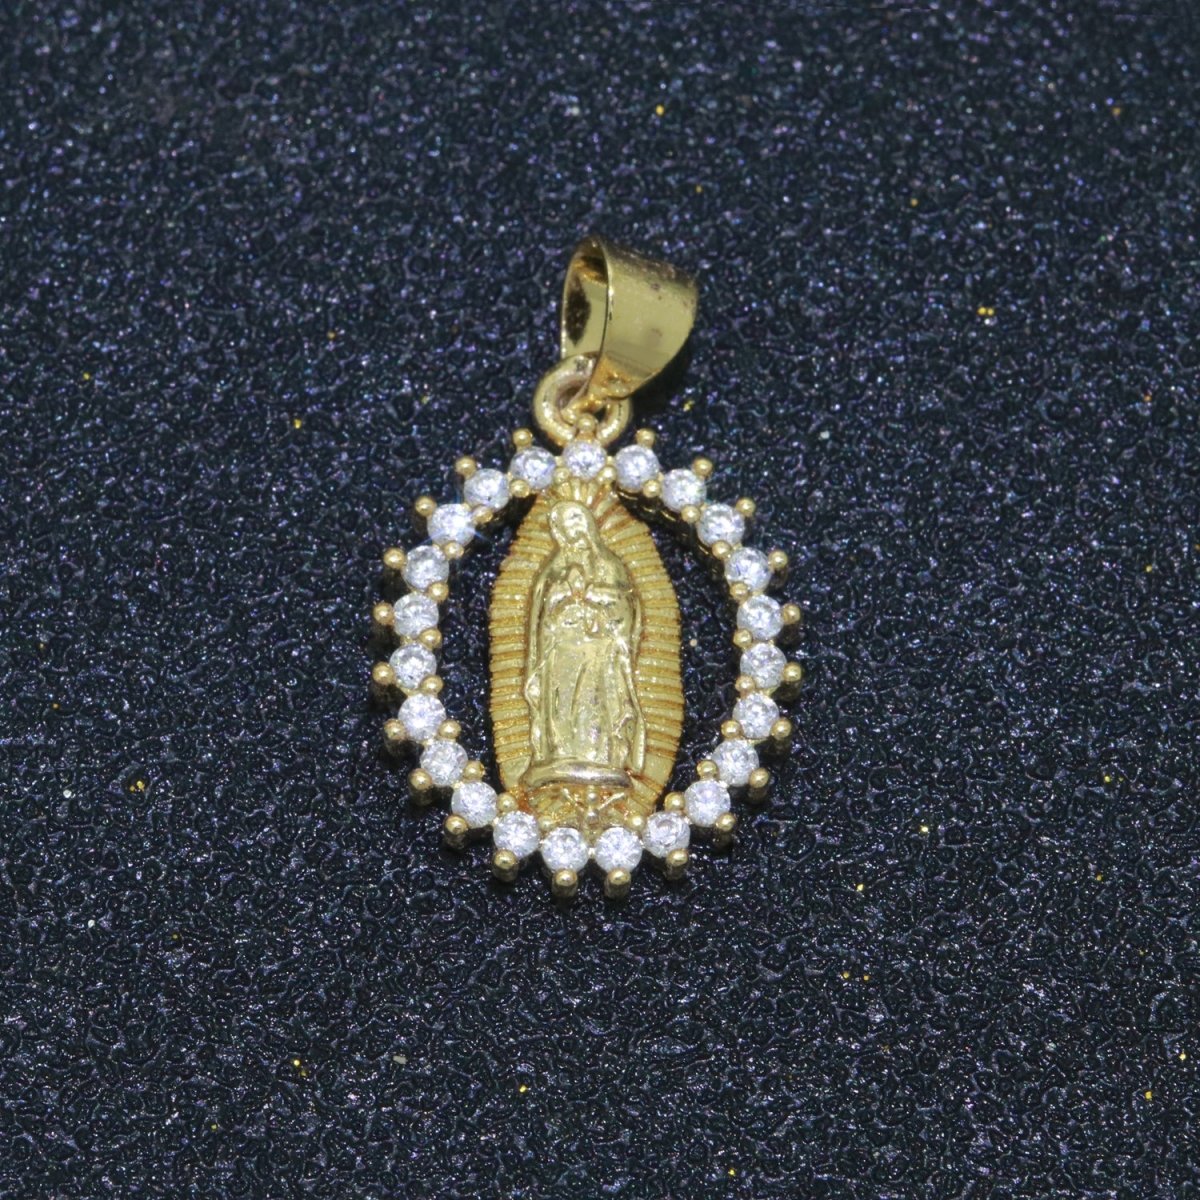 14K Gold Filled Virgin Mary Medallion Charm 23x14mm - Religious Catholic Pendant Saint Miraculous Lady Guadalupe Charm for Necklace Bracelet | N1322~N1325 - DLUXCA